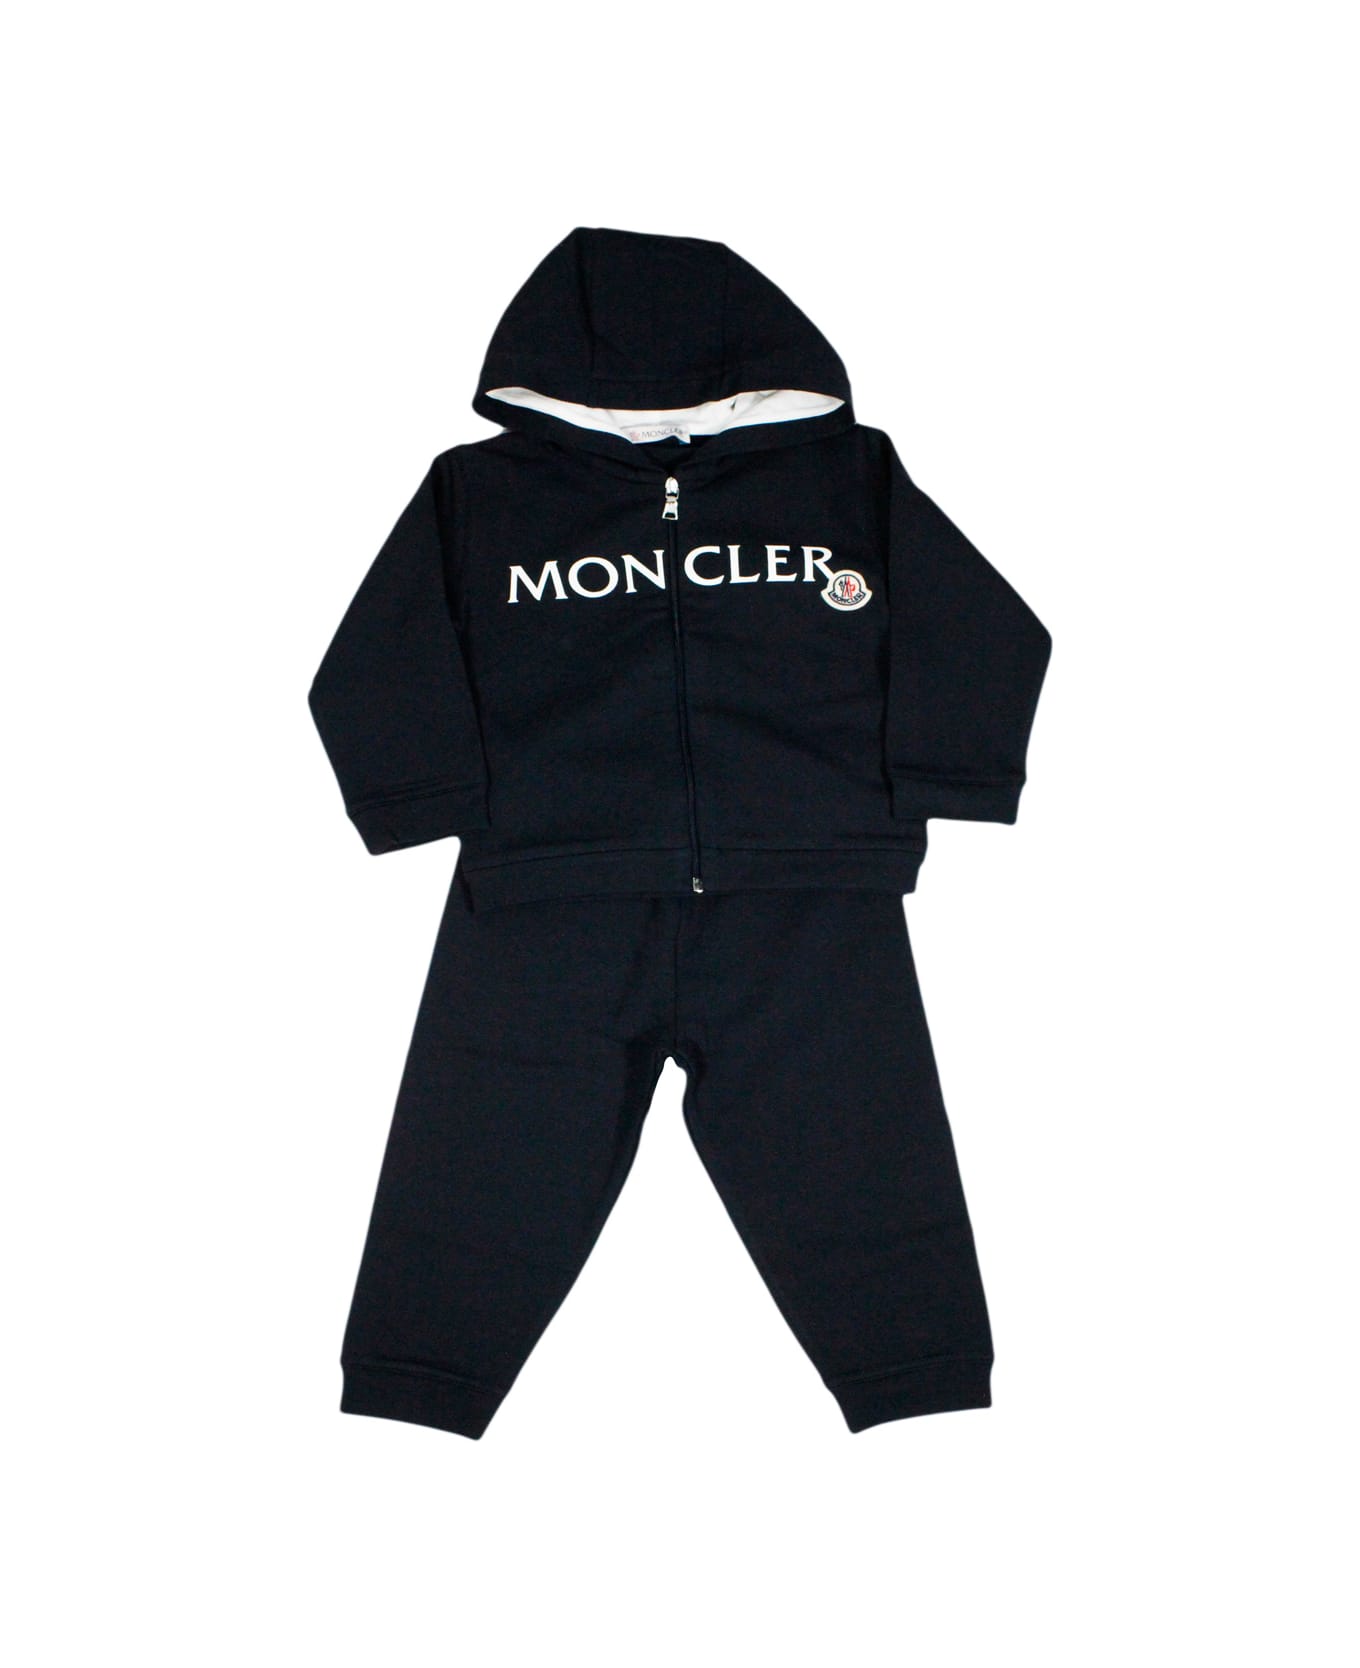 Moncler Complete With Zip-up Sweatshirt With Long-sleeved Hood In Fine Cotton And Trousers With Elastic Waist. Writing And Logo On The Chest - Blu